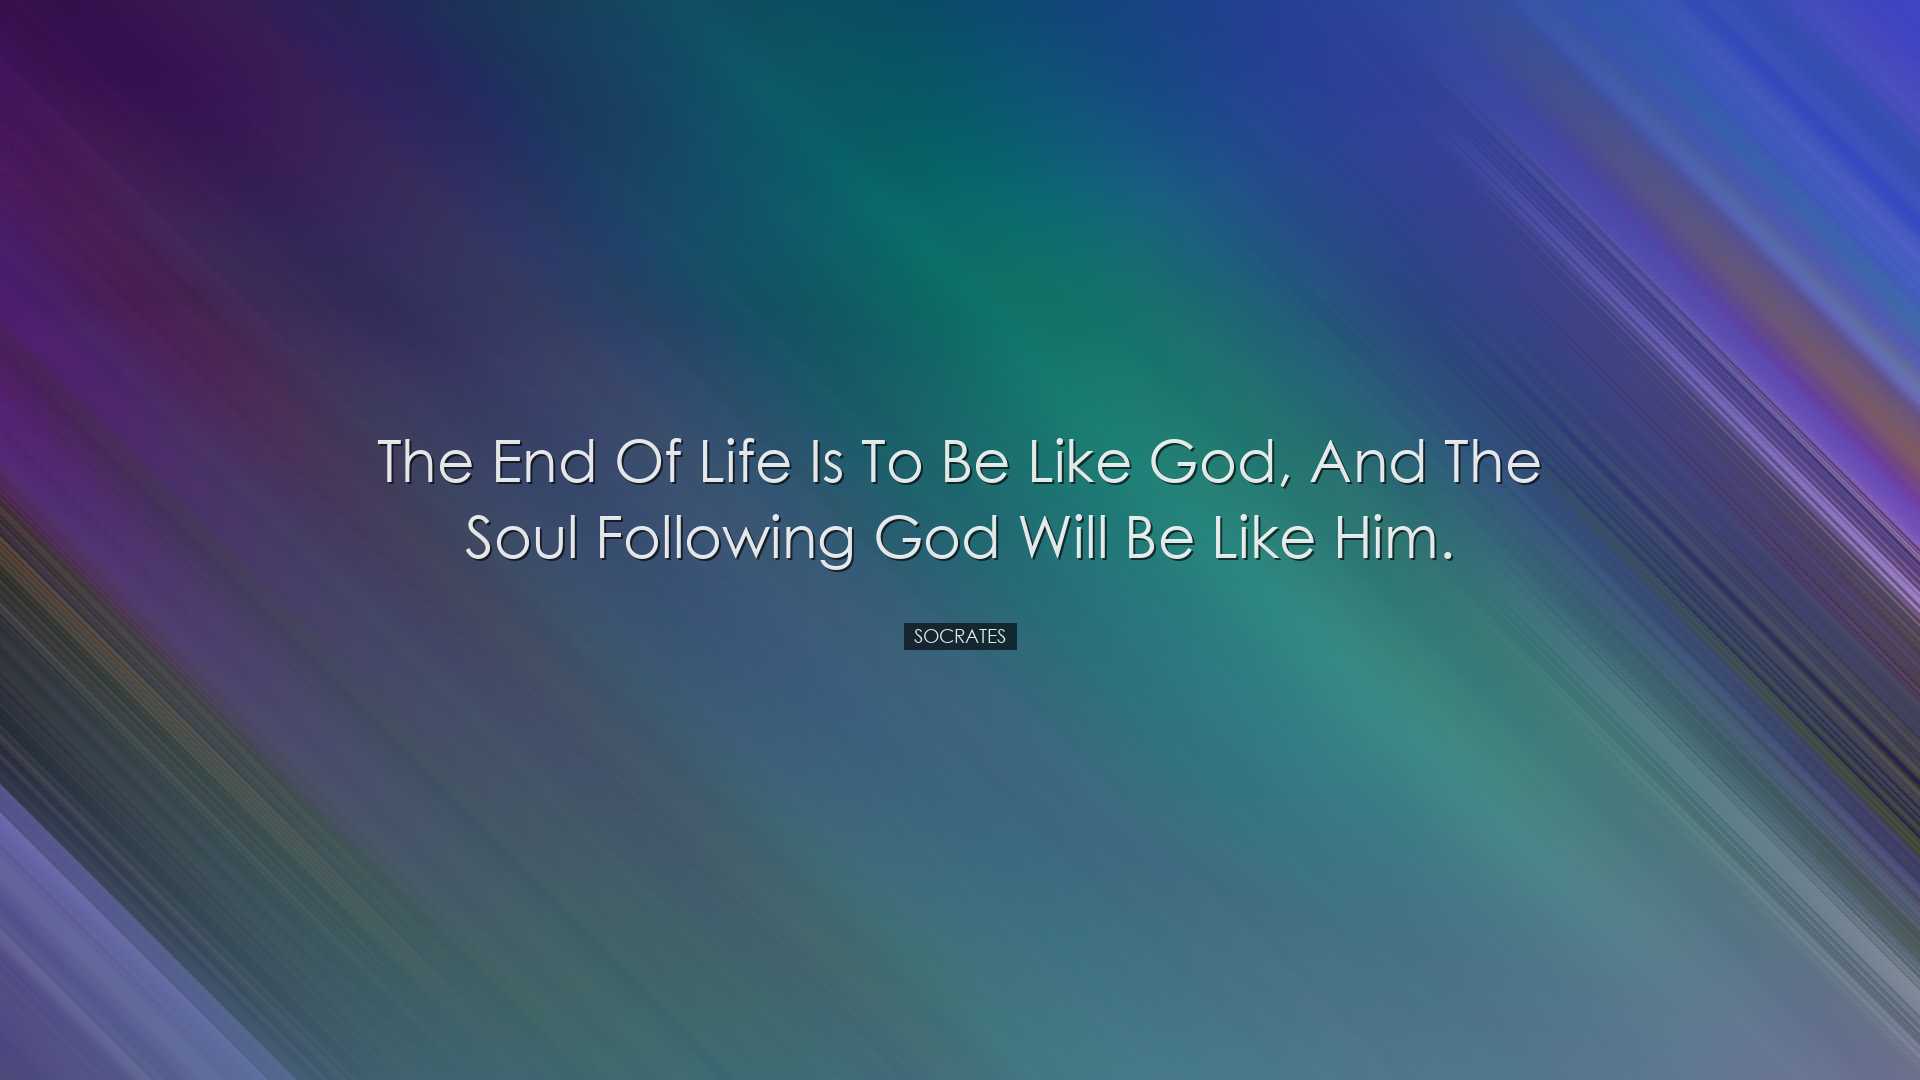 The end of life is to be like God, and the soul following God will